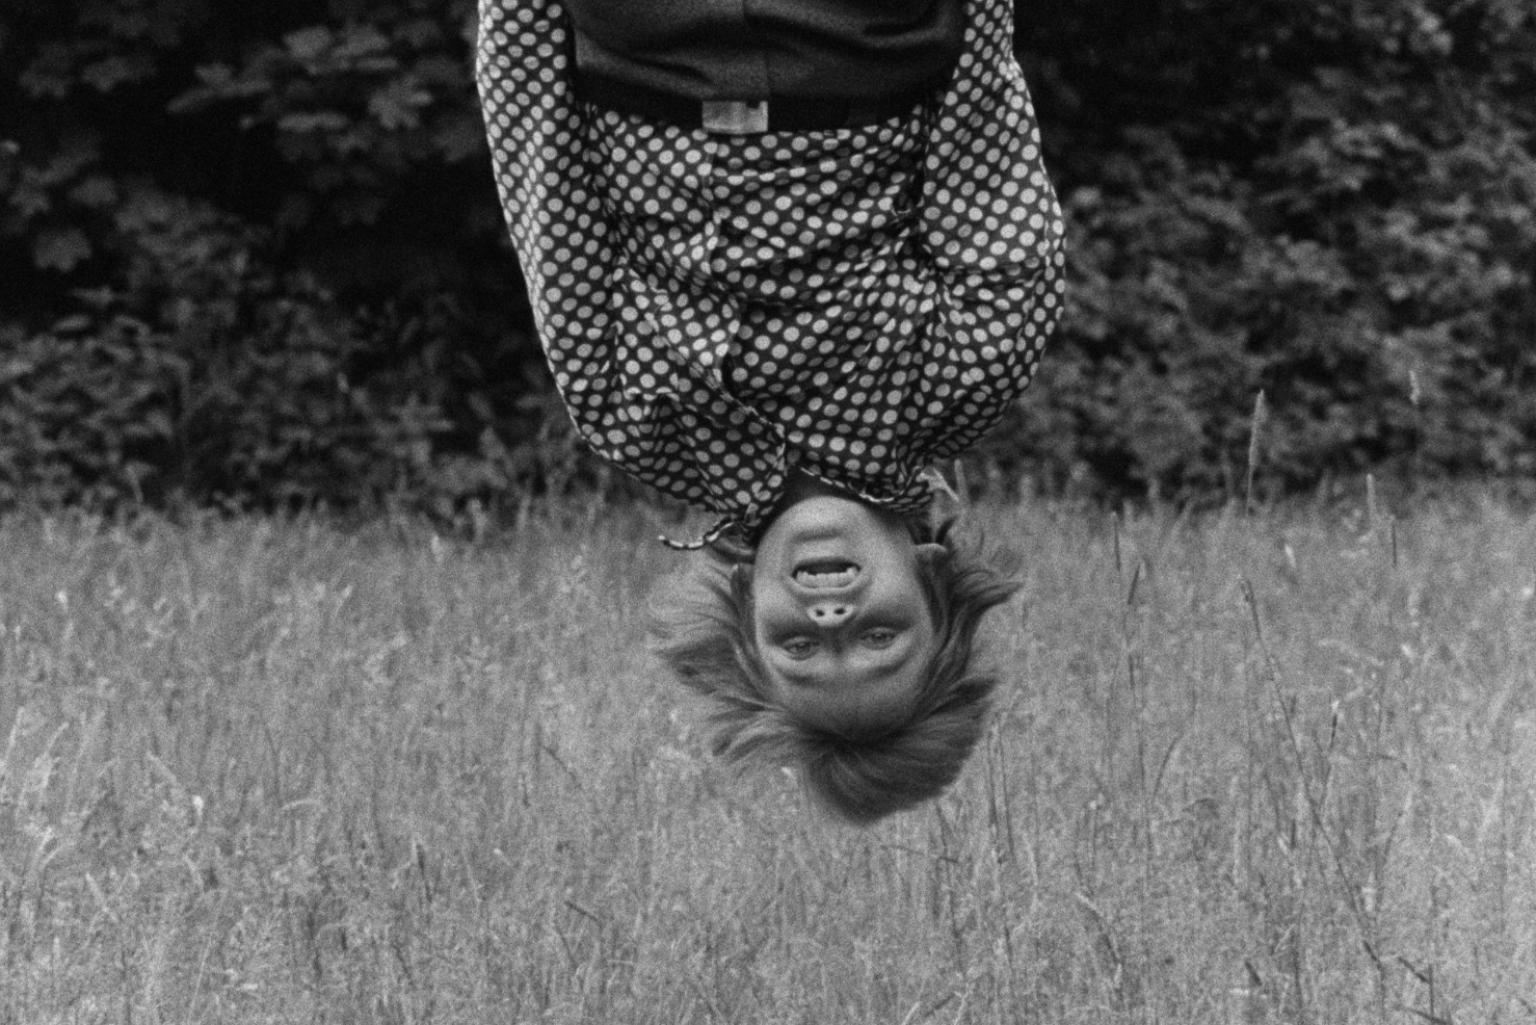 A black and white image of a young person hanging head over heels into the frame, with a cornfield in the background. The person is wearing a polka-dotted shirt and is smiling into the camera.